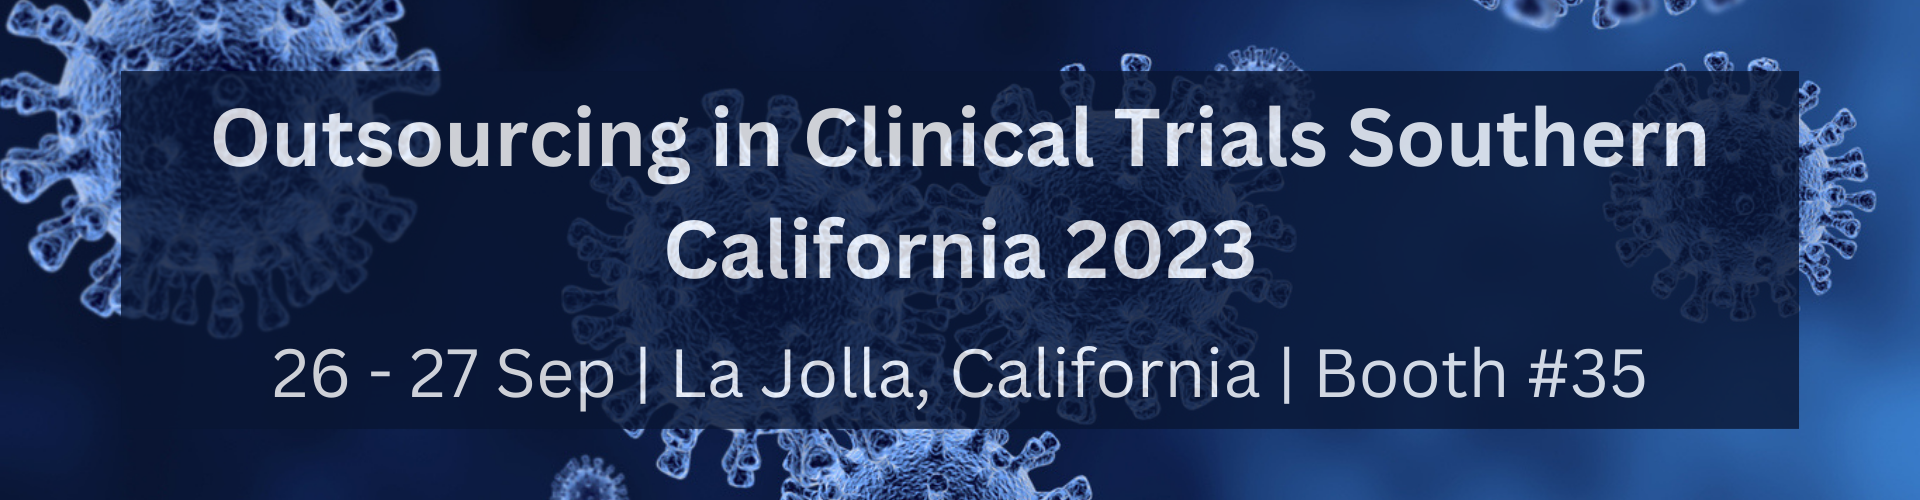 Outsourcing in Clinical Trials Southern California 2023 26 - 27 Sep  La Jolla, California  Booth #35 (1)